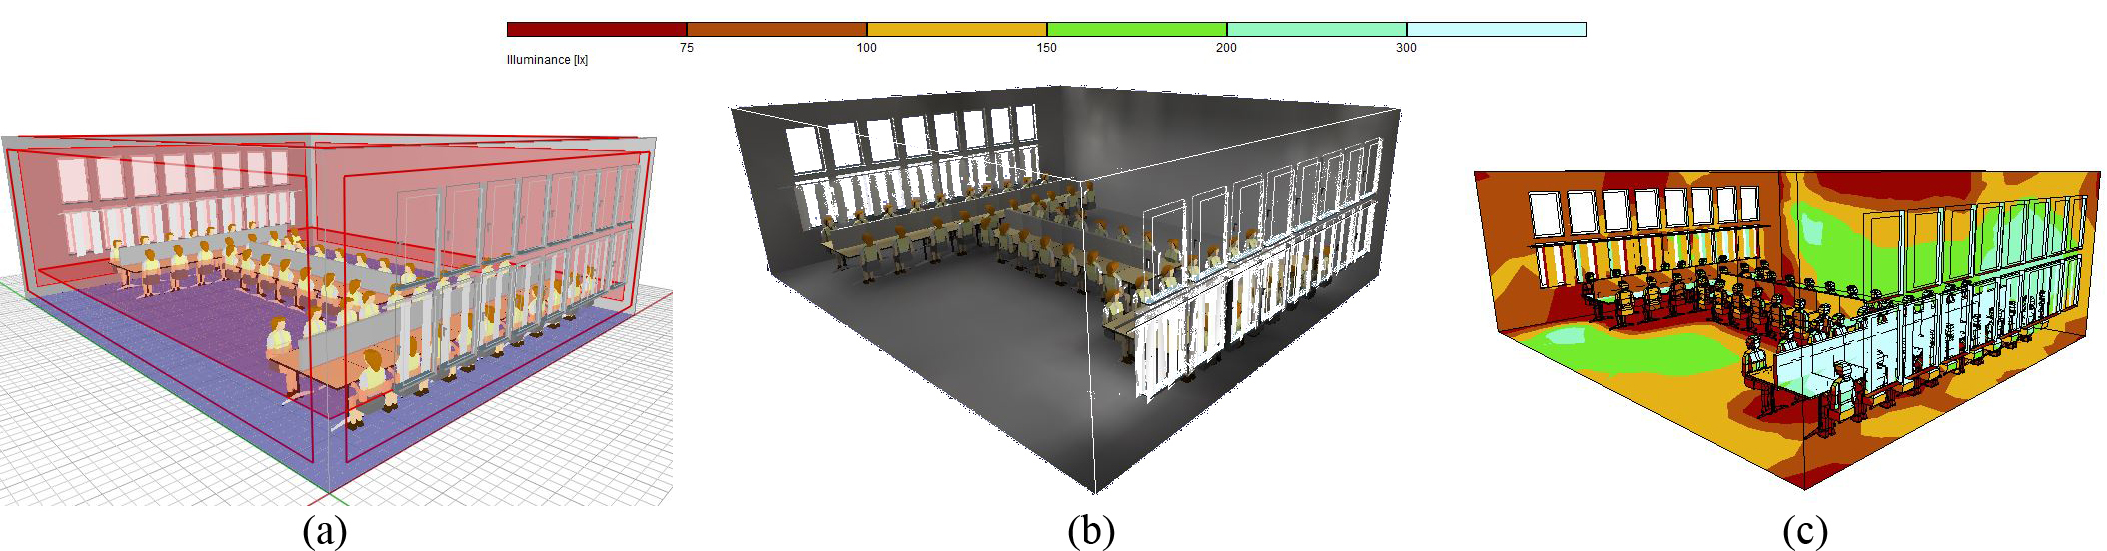 (a) Three-dimensional display of optimal architecture model, (b) lighting distribution in space, and (c) distribution of daylight factor in the optimal model of study hall for scenario 18.